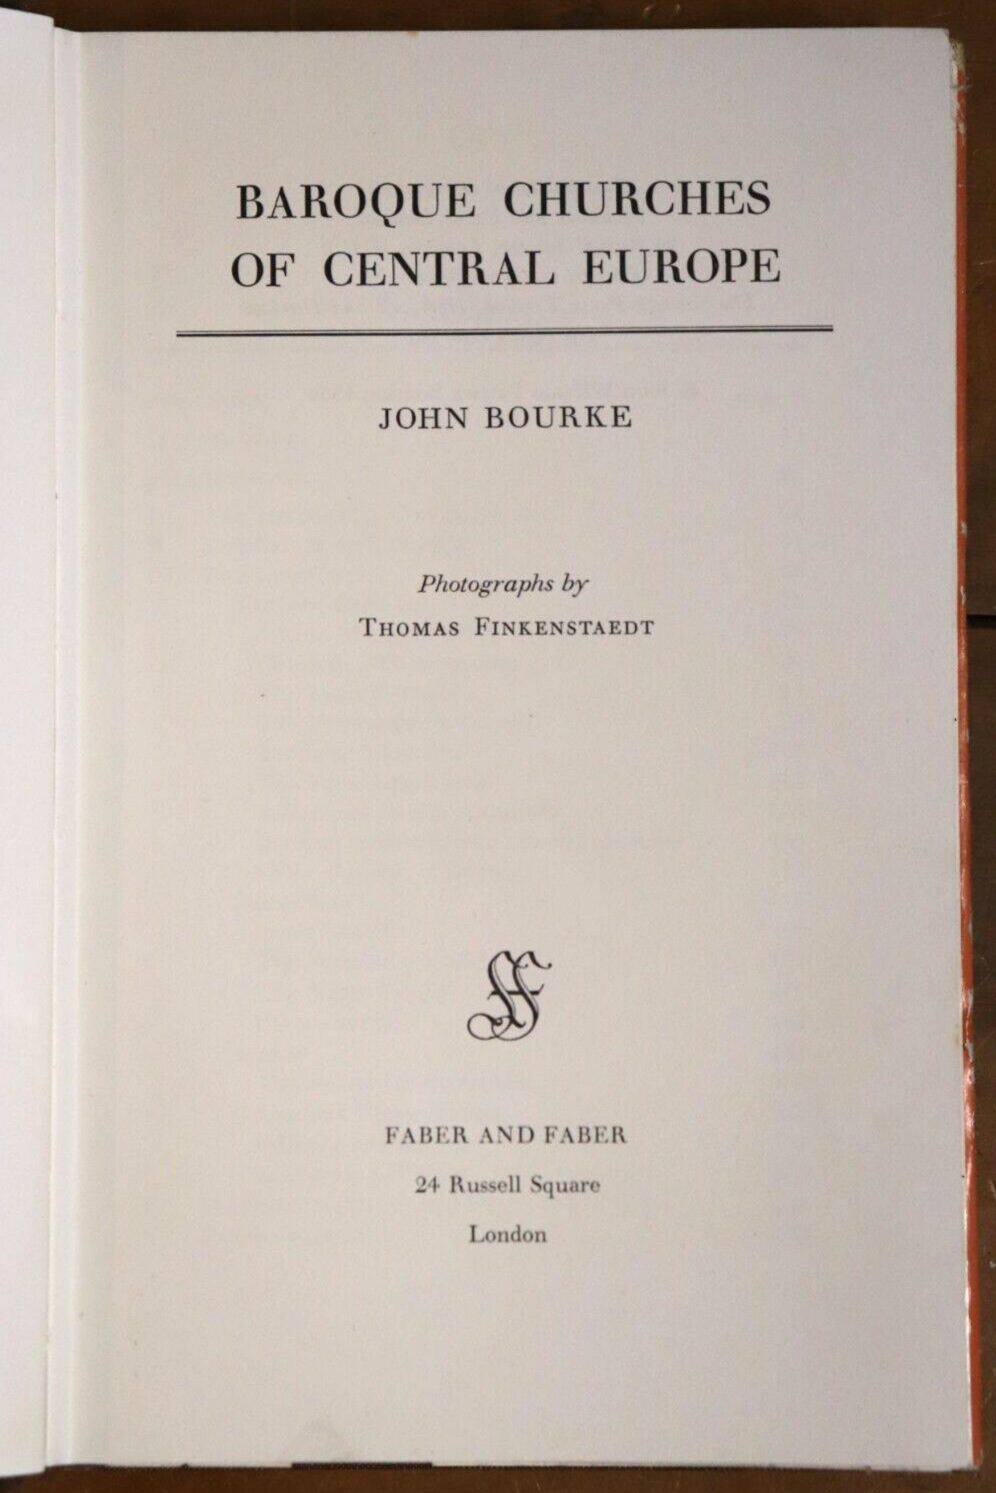 1958 Baroque Churches Of Central Europe Antique Architecture Book 1st Edition - 0